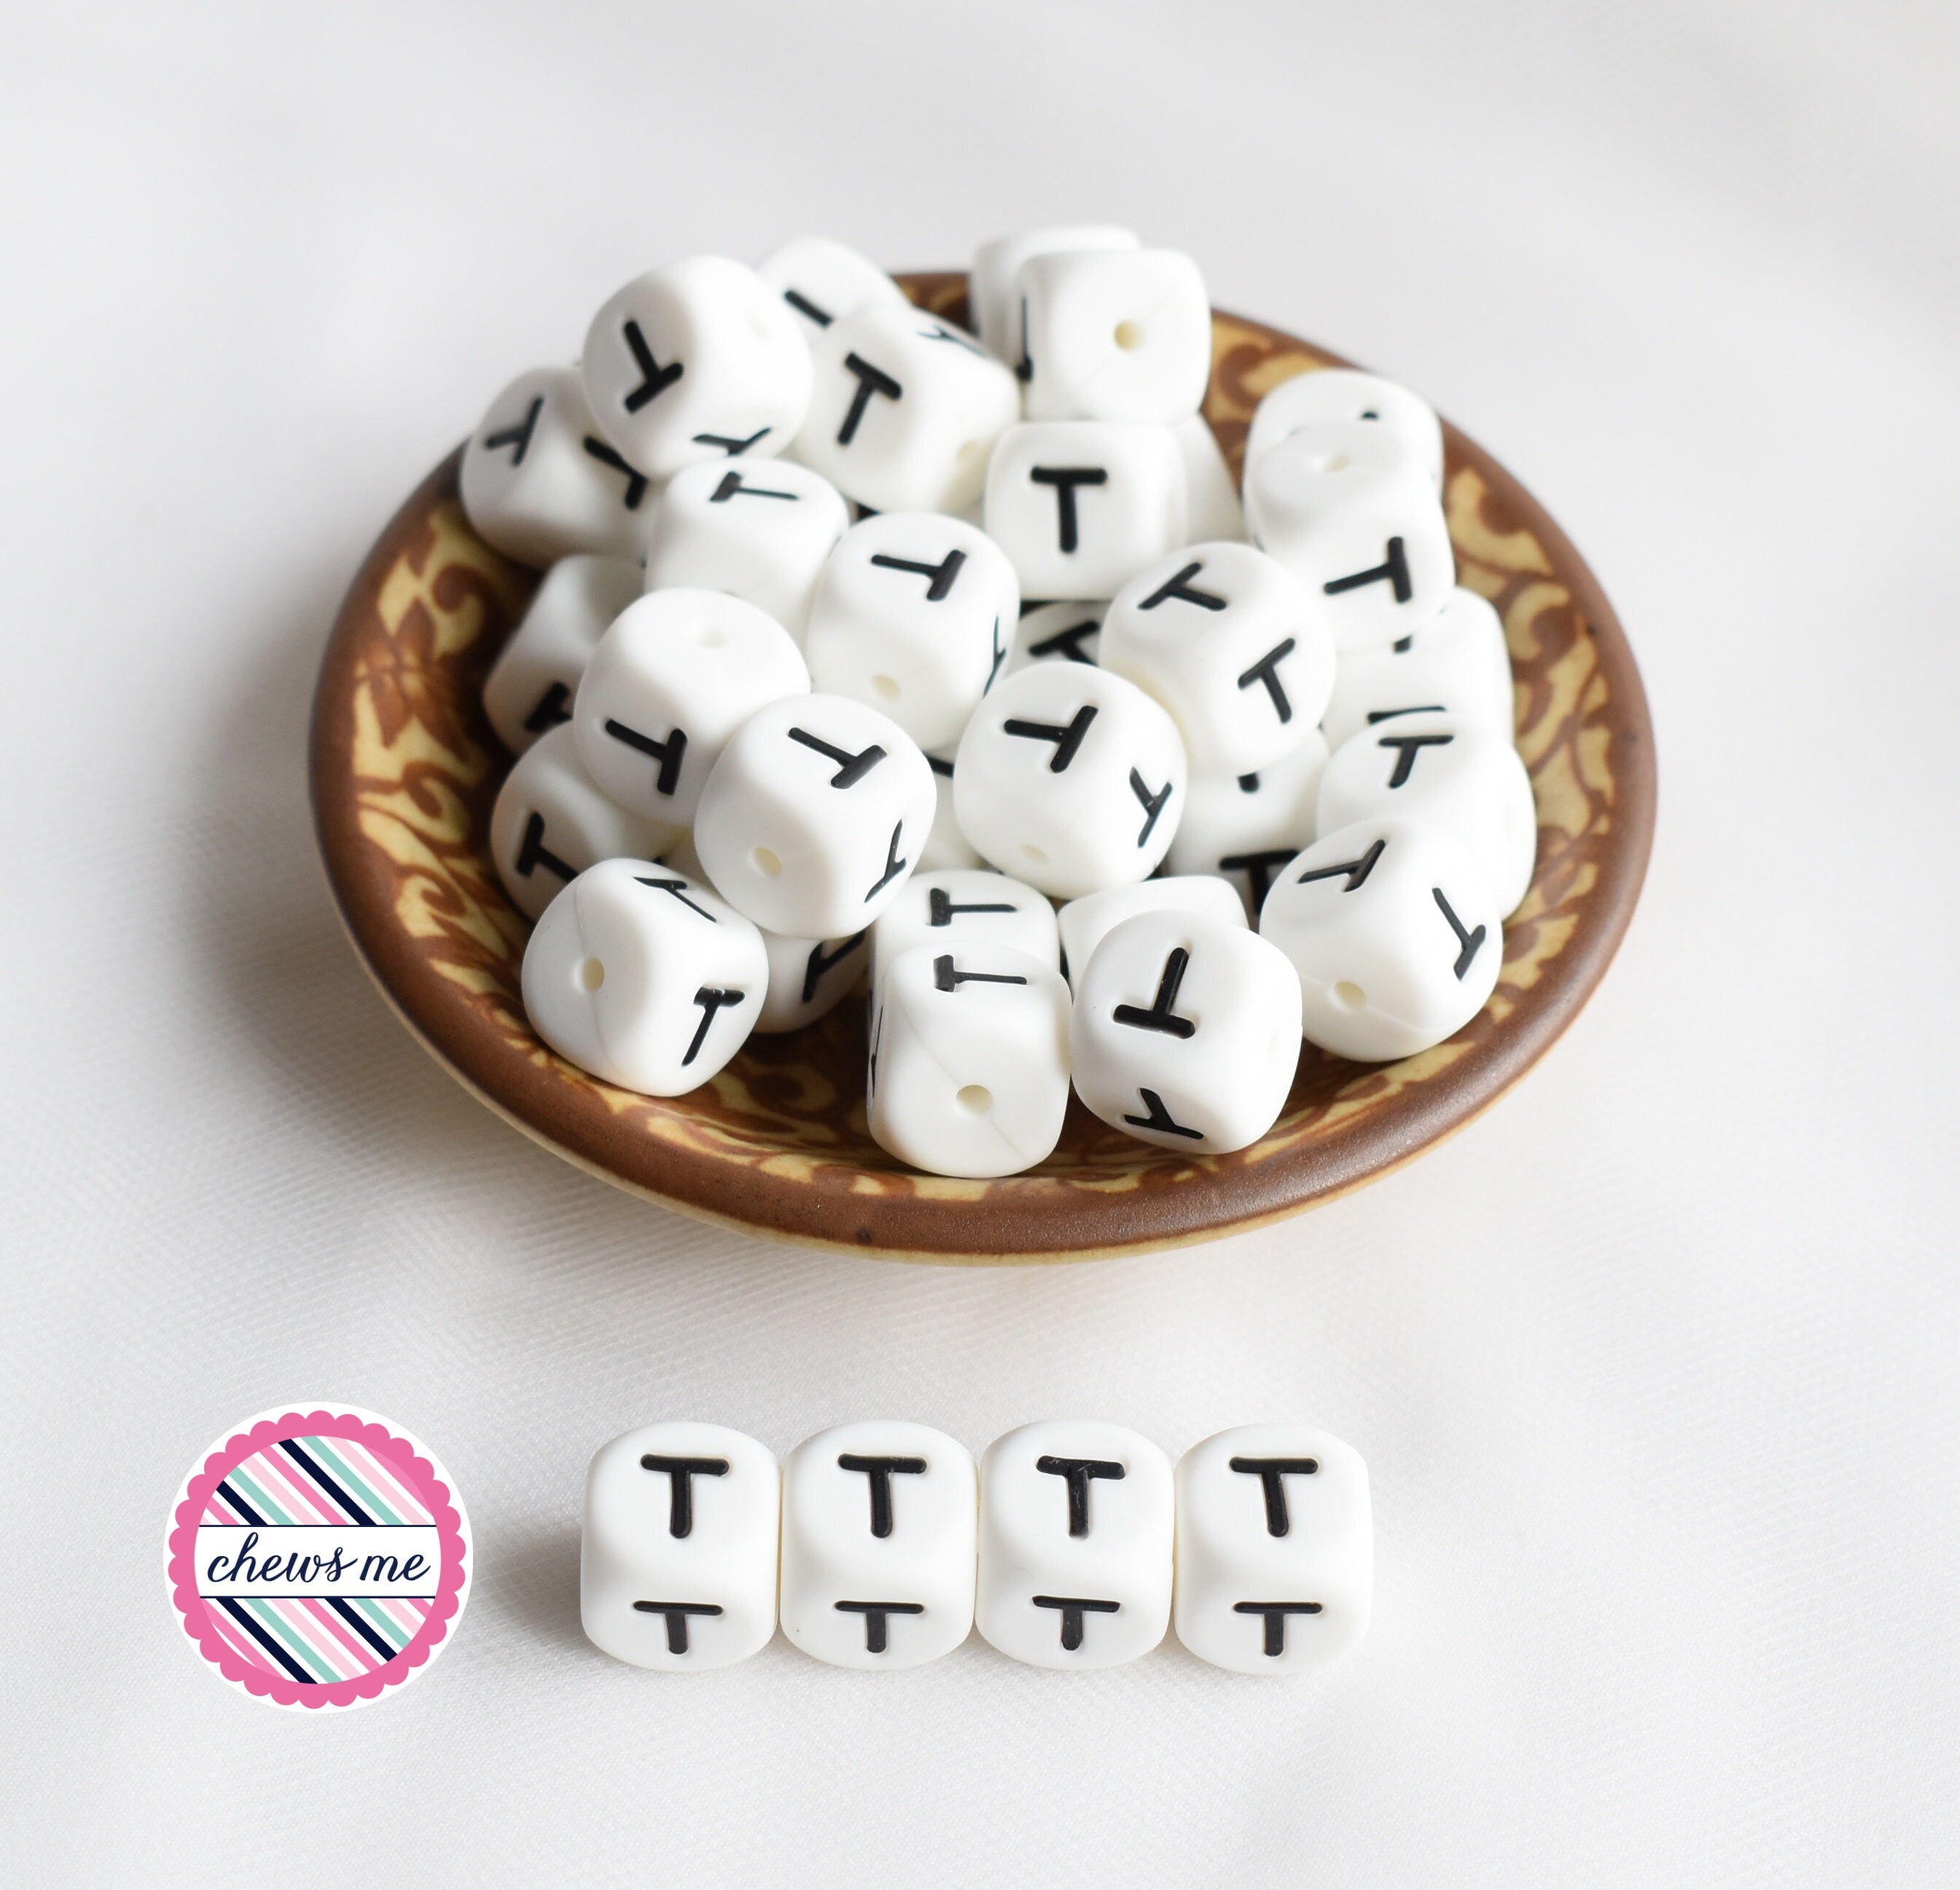 12mm white letter I silicone bead DIY Stim Toy Fidget capital letter cube silicone bead Sensory square dice